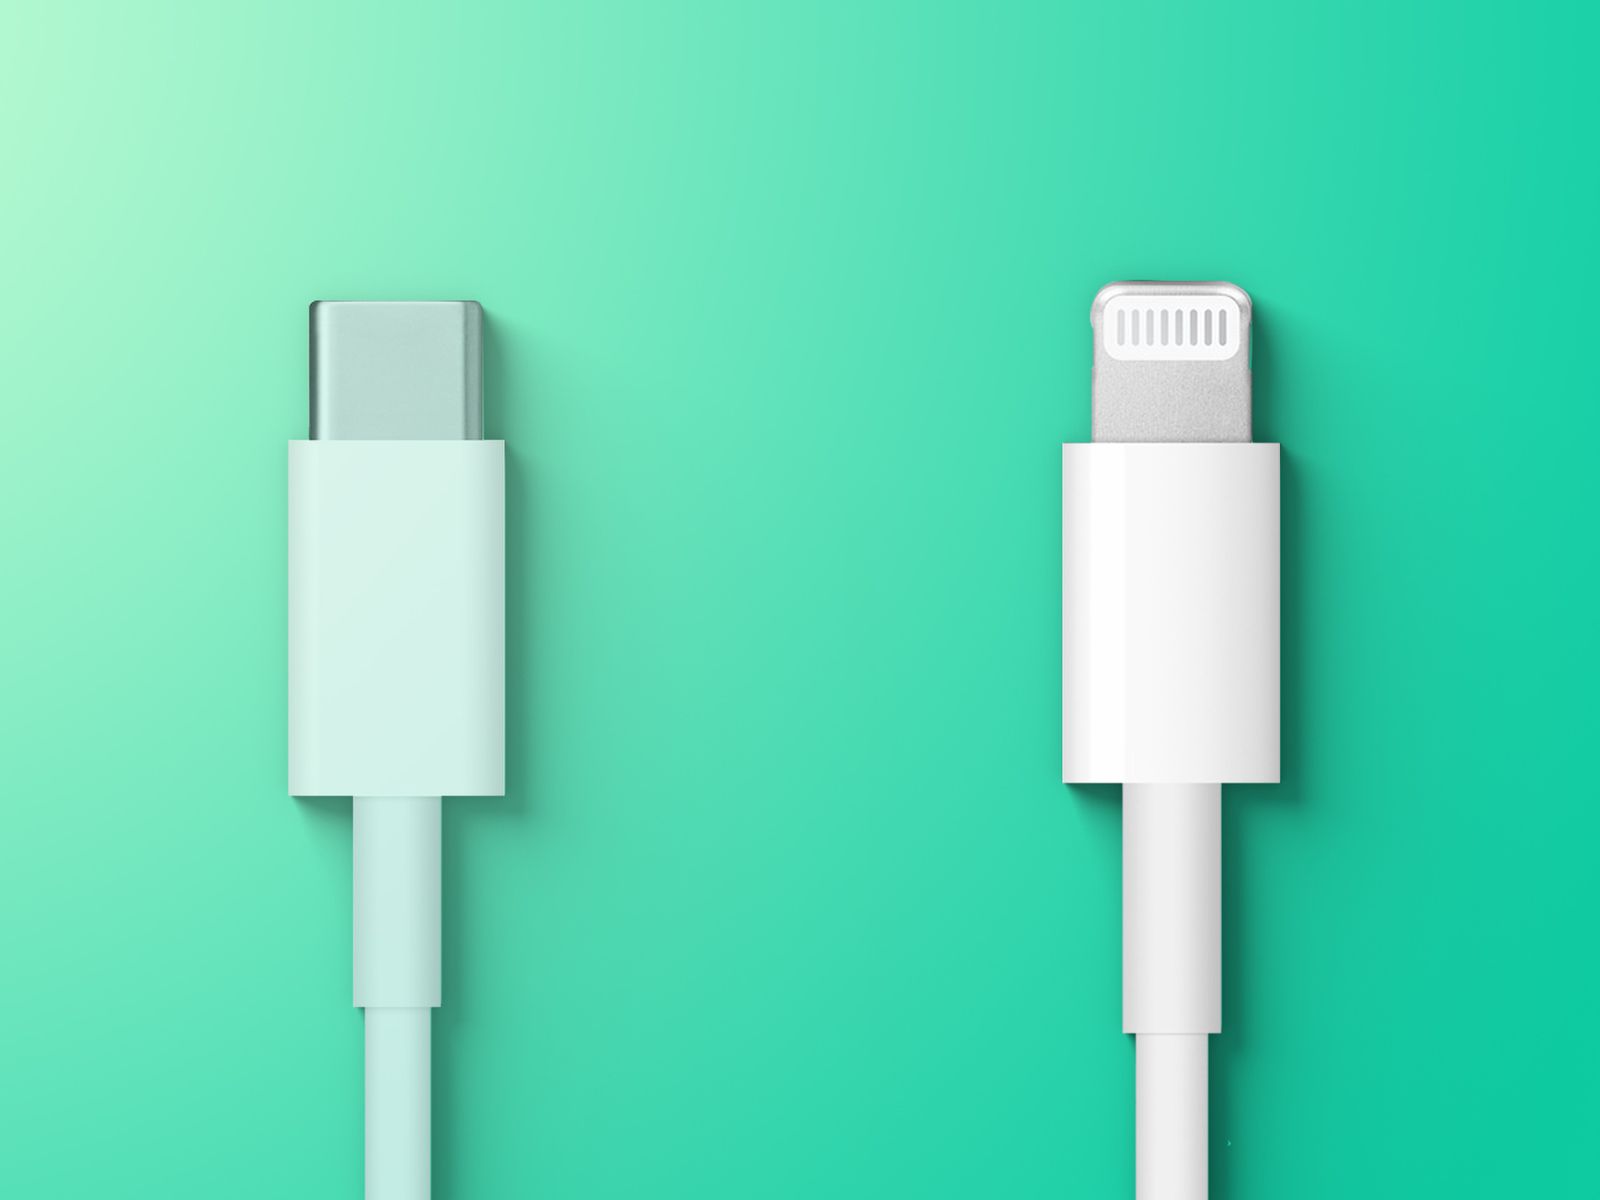 iPhone Sticking With Lightning Port Over USB-C for 'Foreseeable Future' -